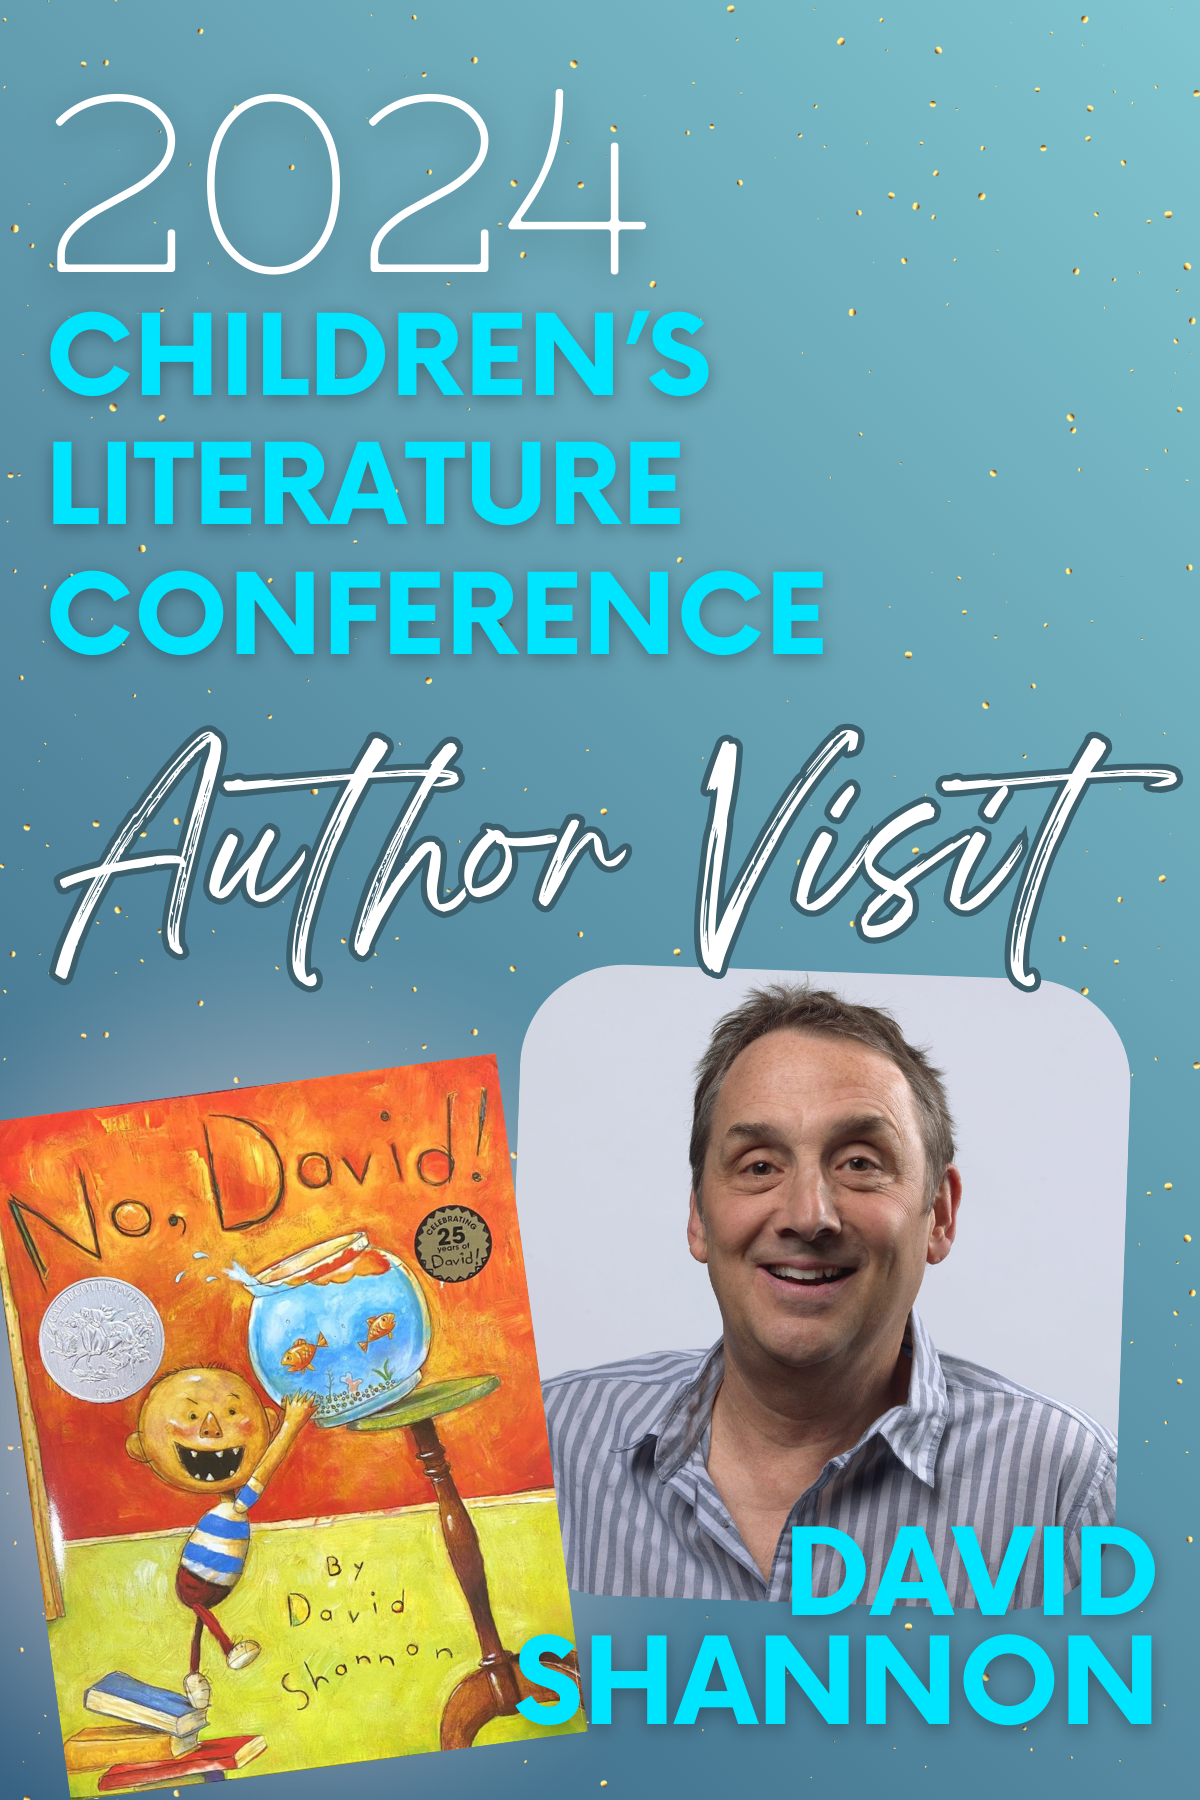 Virtual Author Visit & Corresponding Happy Hour with David Shannon